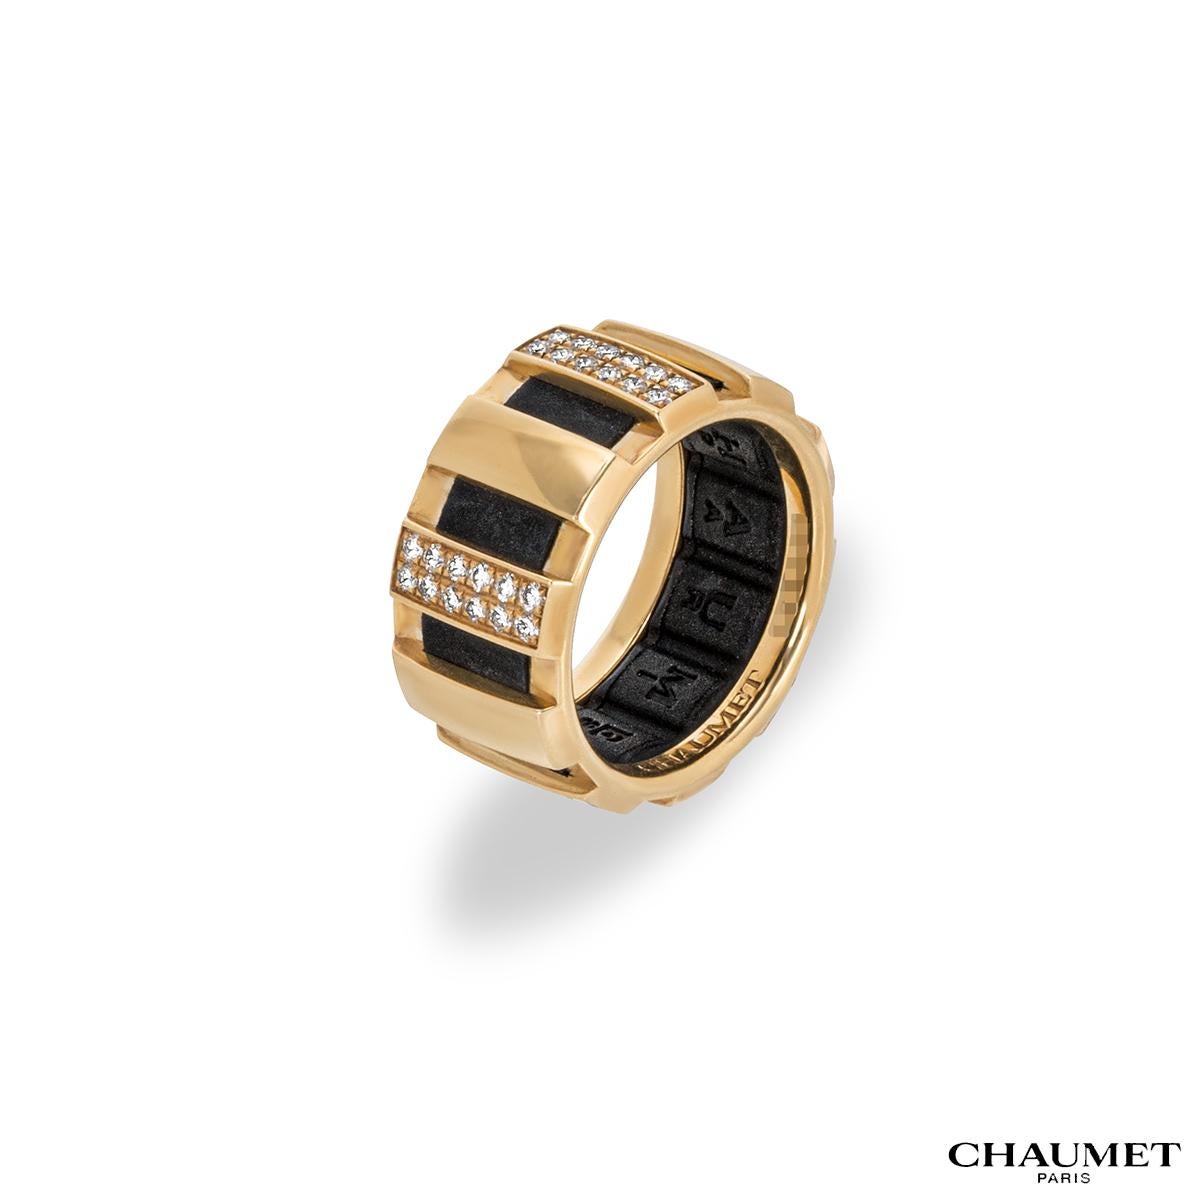 An 18k yellow gold diamond ring by Chaumet from the Class one collection. The ring comprises of round brilliant cut diamonds in a pave setting on each rectangle shaped segment with a rubber band on the inside of the ring. There are a total of 60